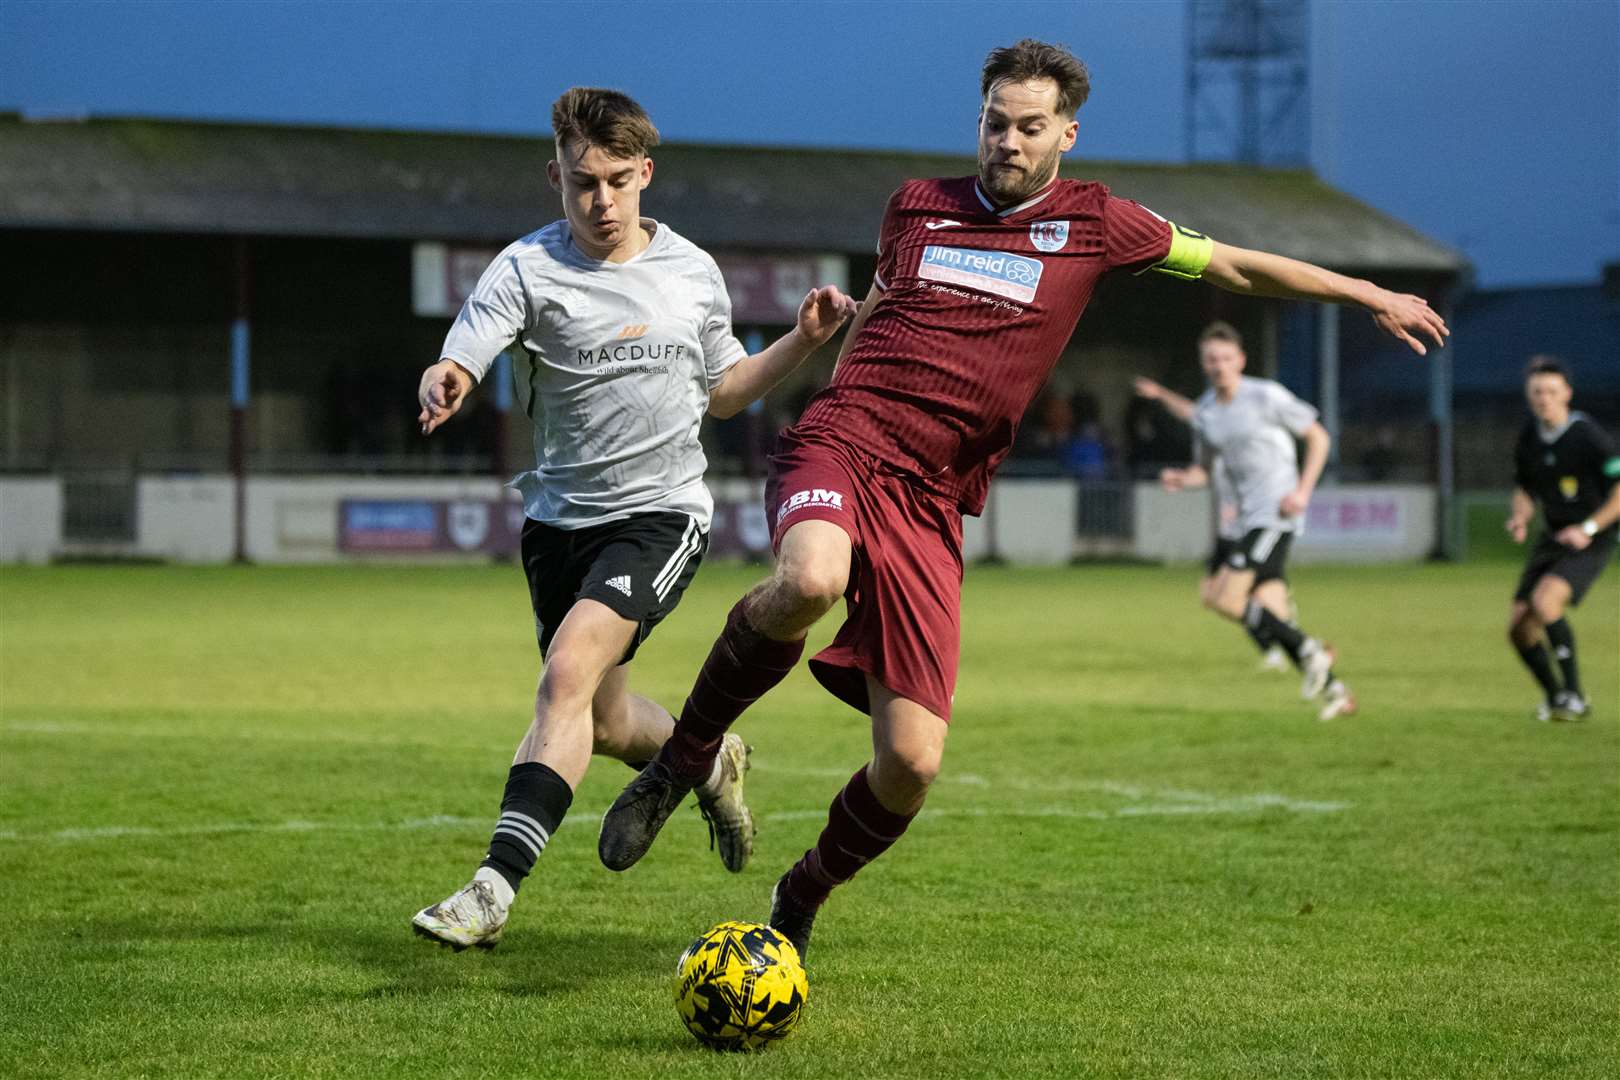 Keith skipper James Brownie competes against Deveronvale's Michael Watson for the ball. ..Keith FC (3) vs Deveronvale FC (2) - Highland Football League 23/24 - Kynoch Park, Keith 09/12/2023...Picture: Daniel Forsyth..